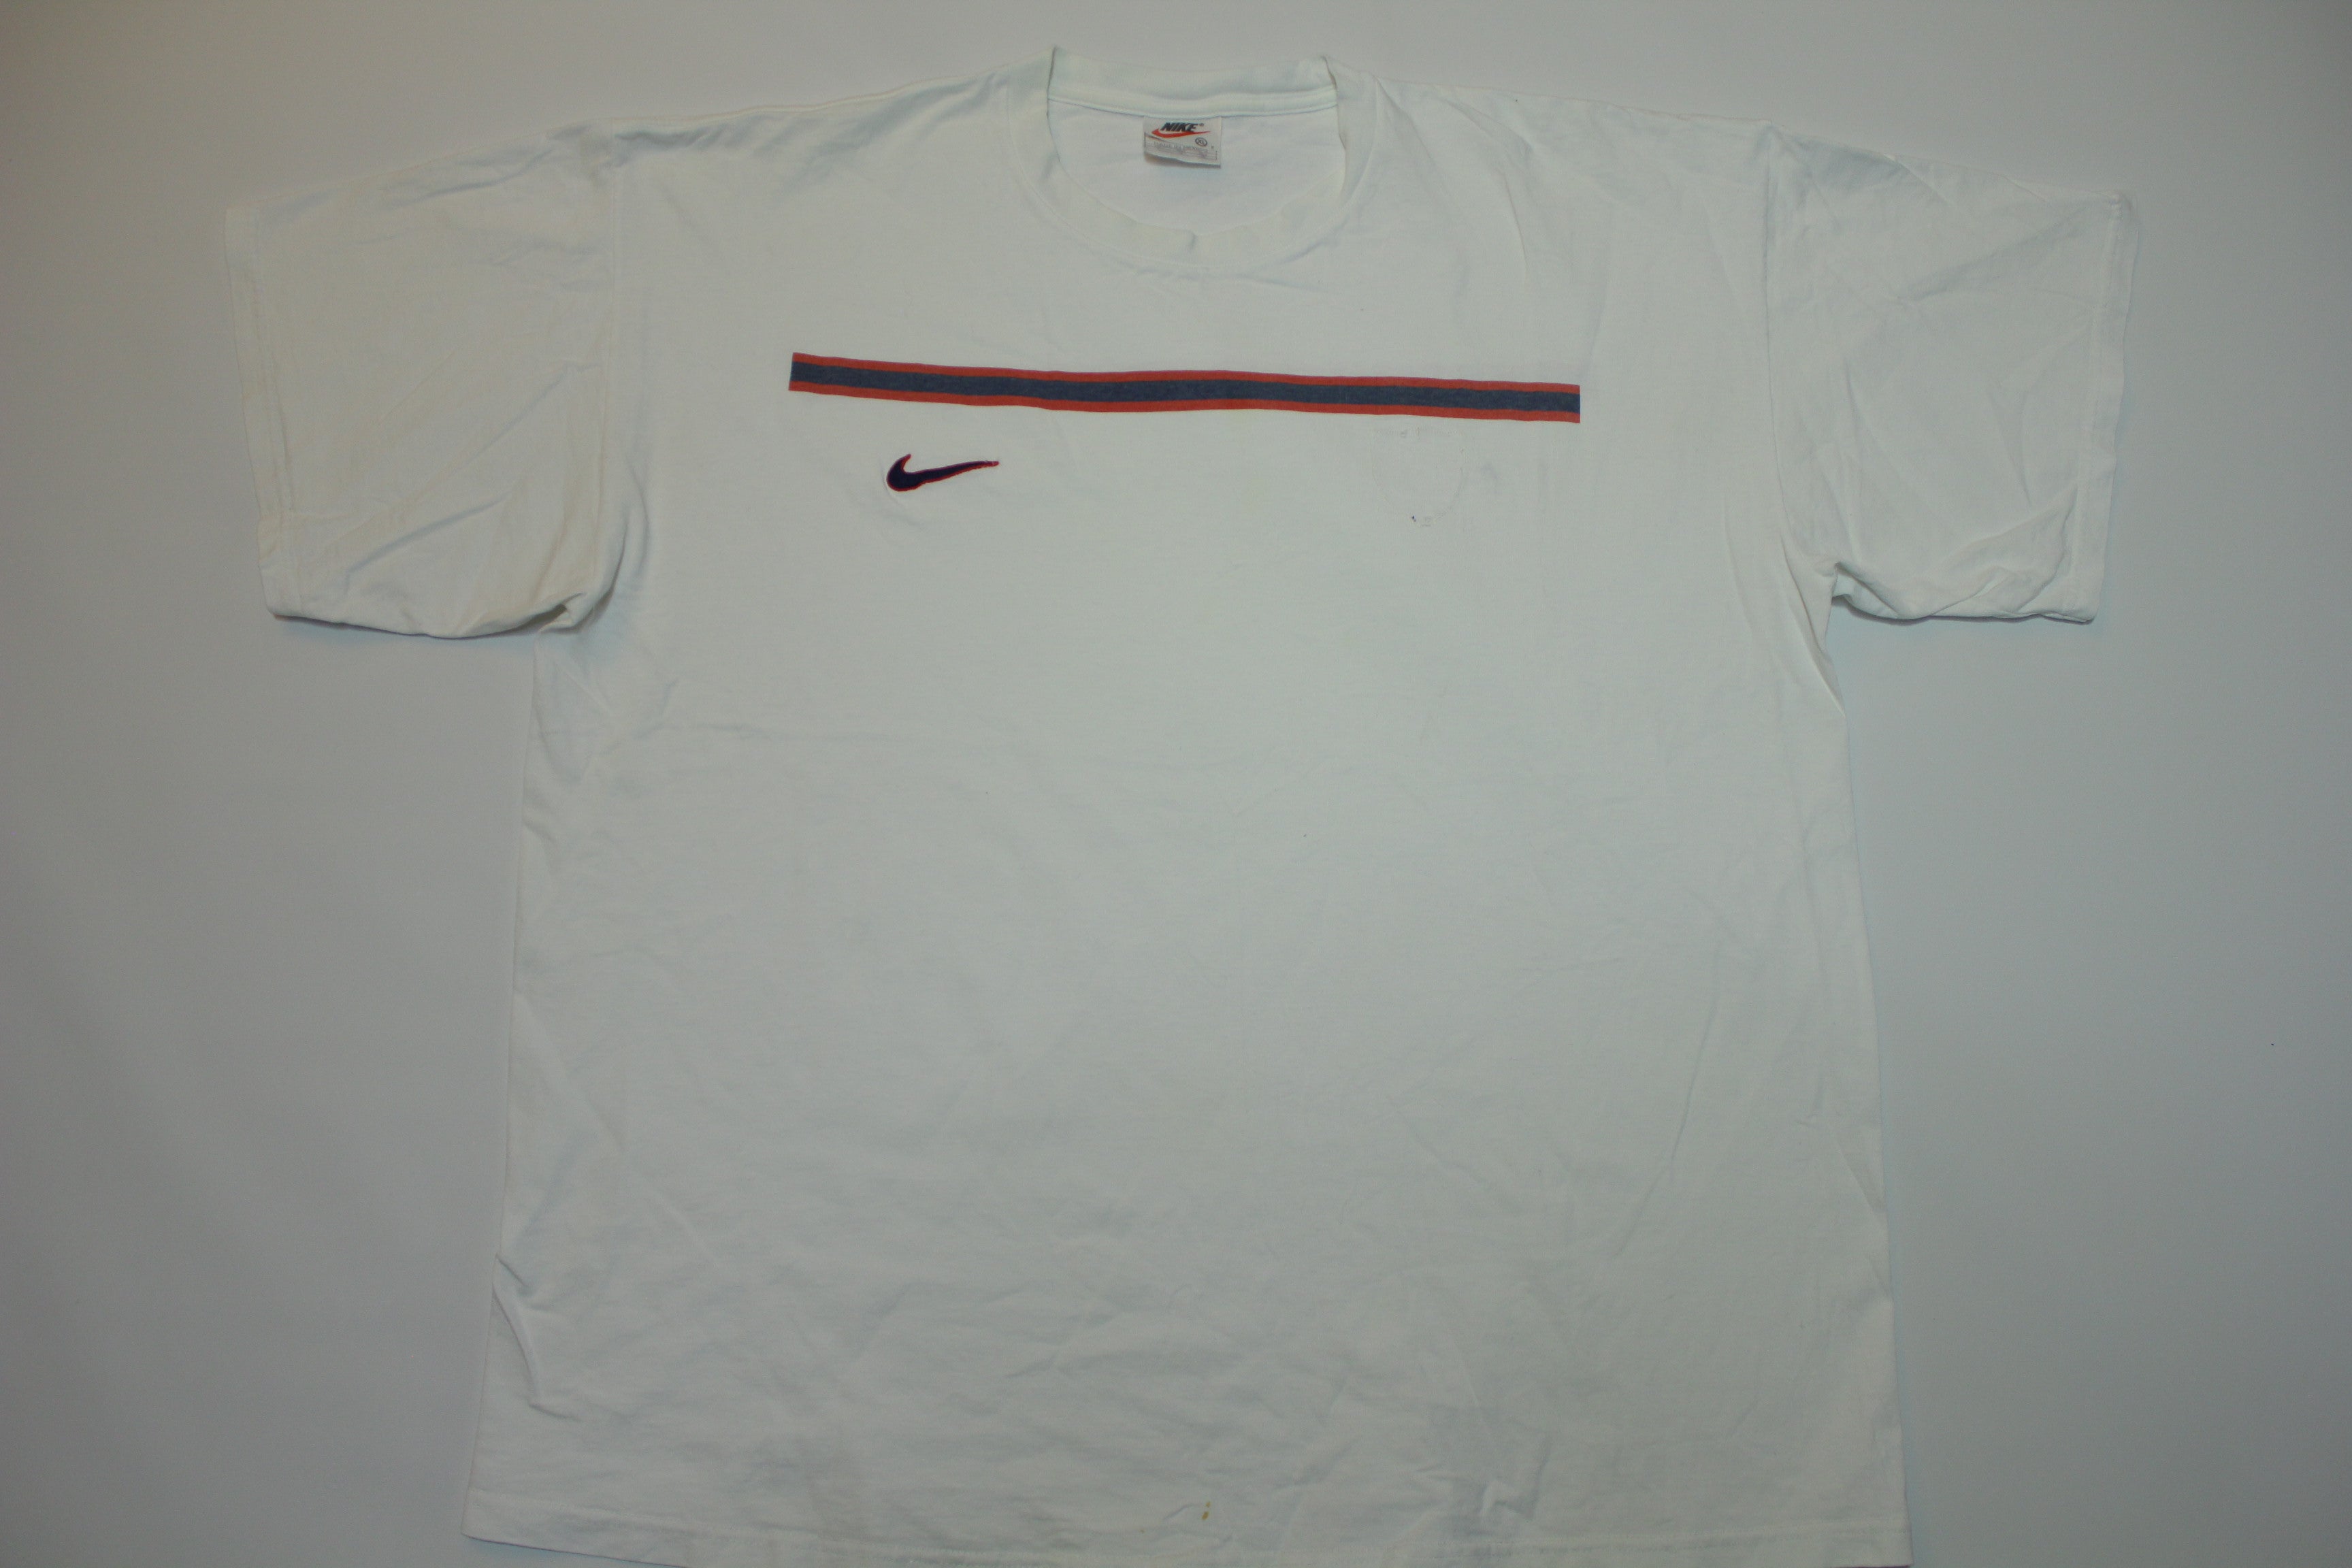 Nike Striped Embroidered Swoosh Check Vintage 90's Distressed T